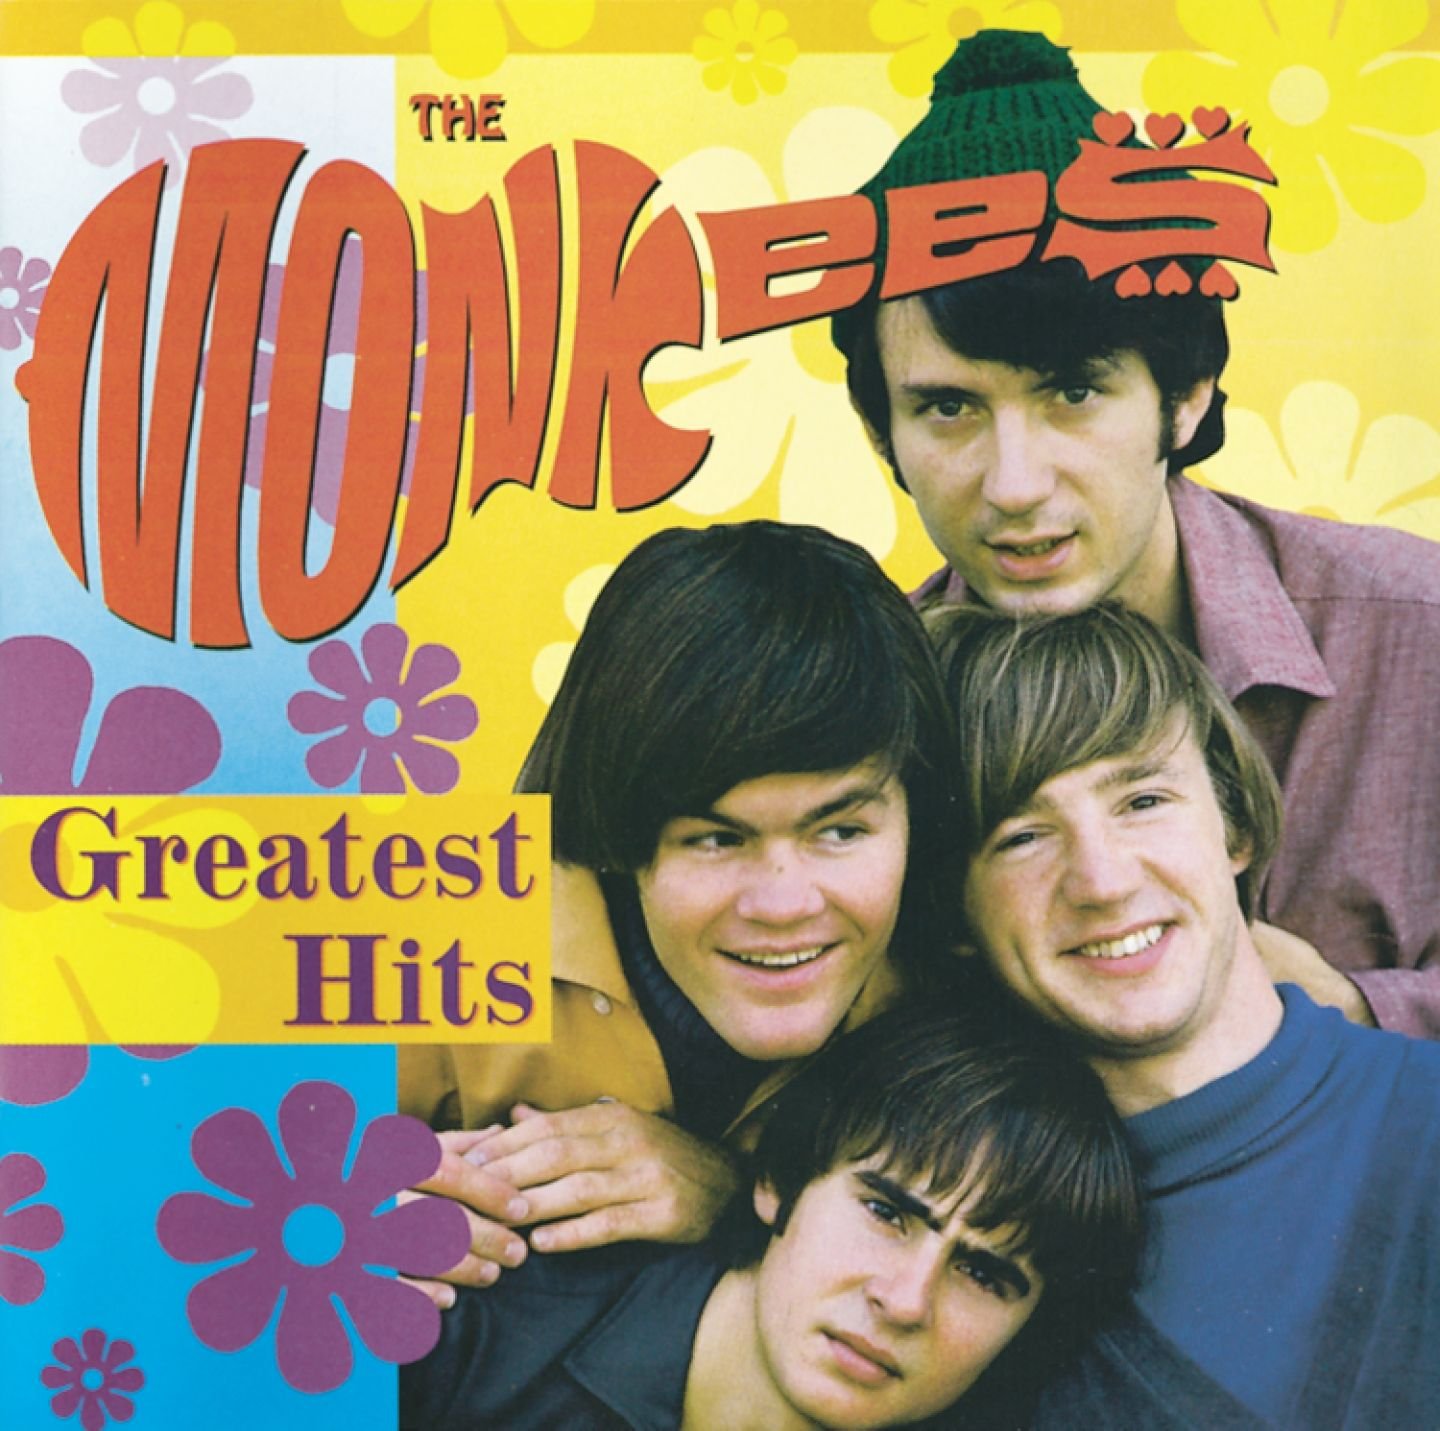 Art for THE MONKEES by THE MONKEES